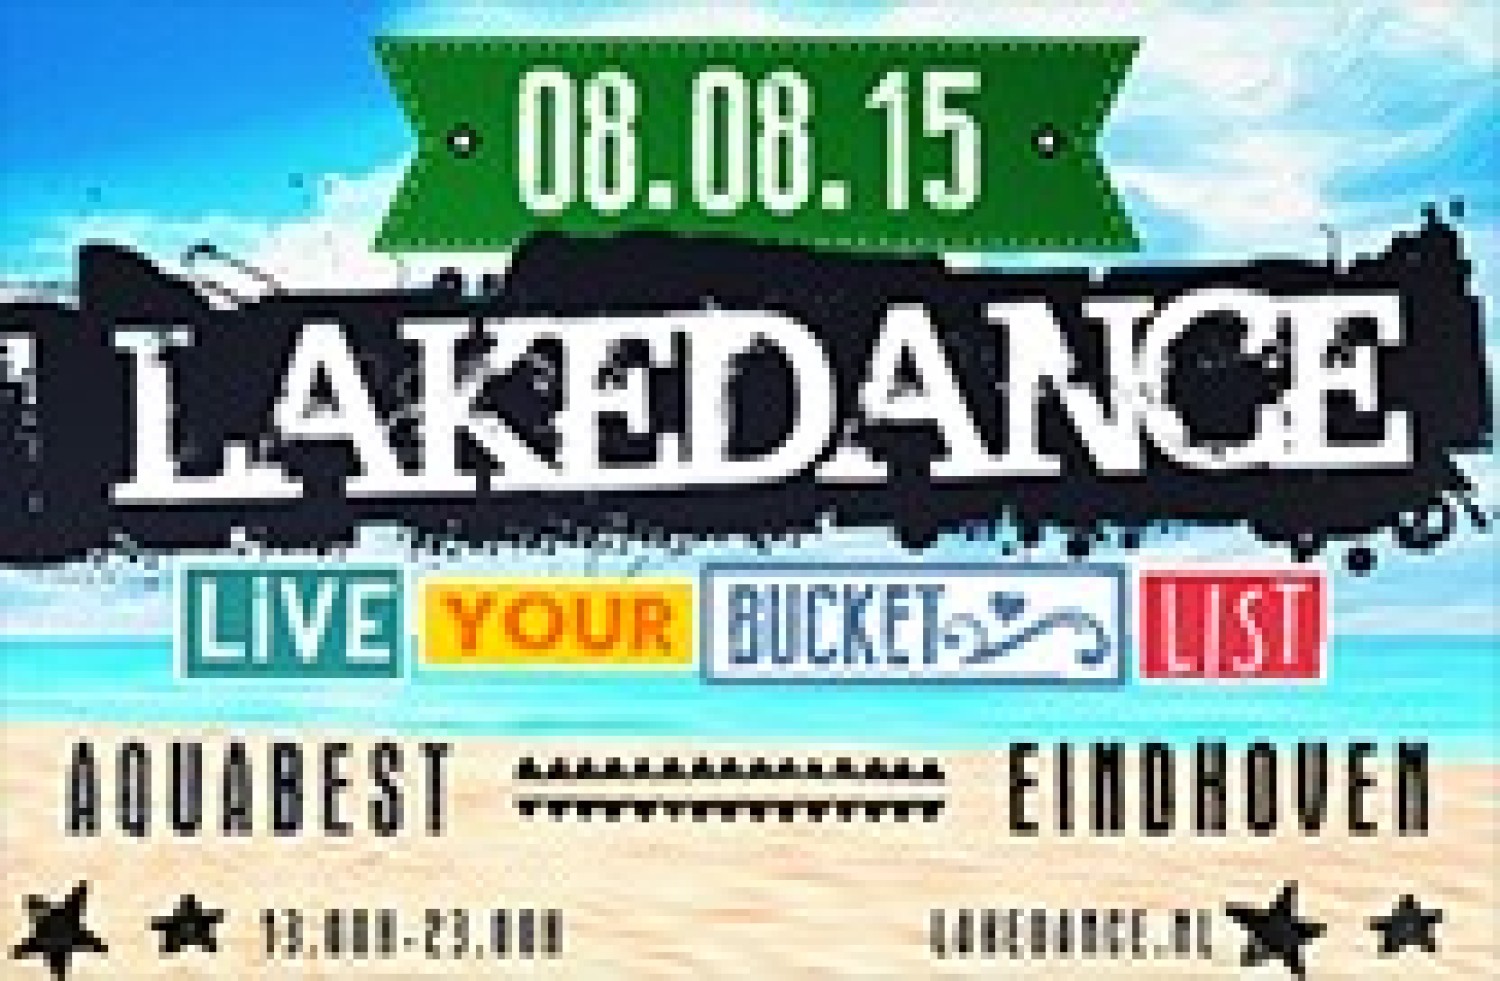 Party report: Lakedance, Best (08-08-2015)